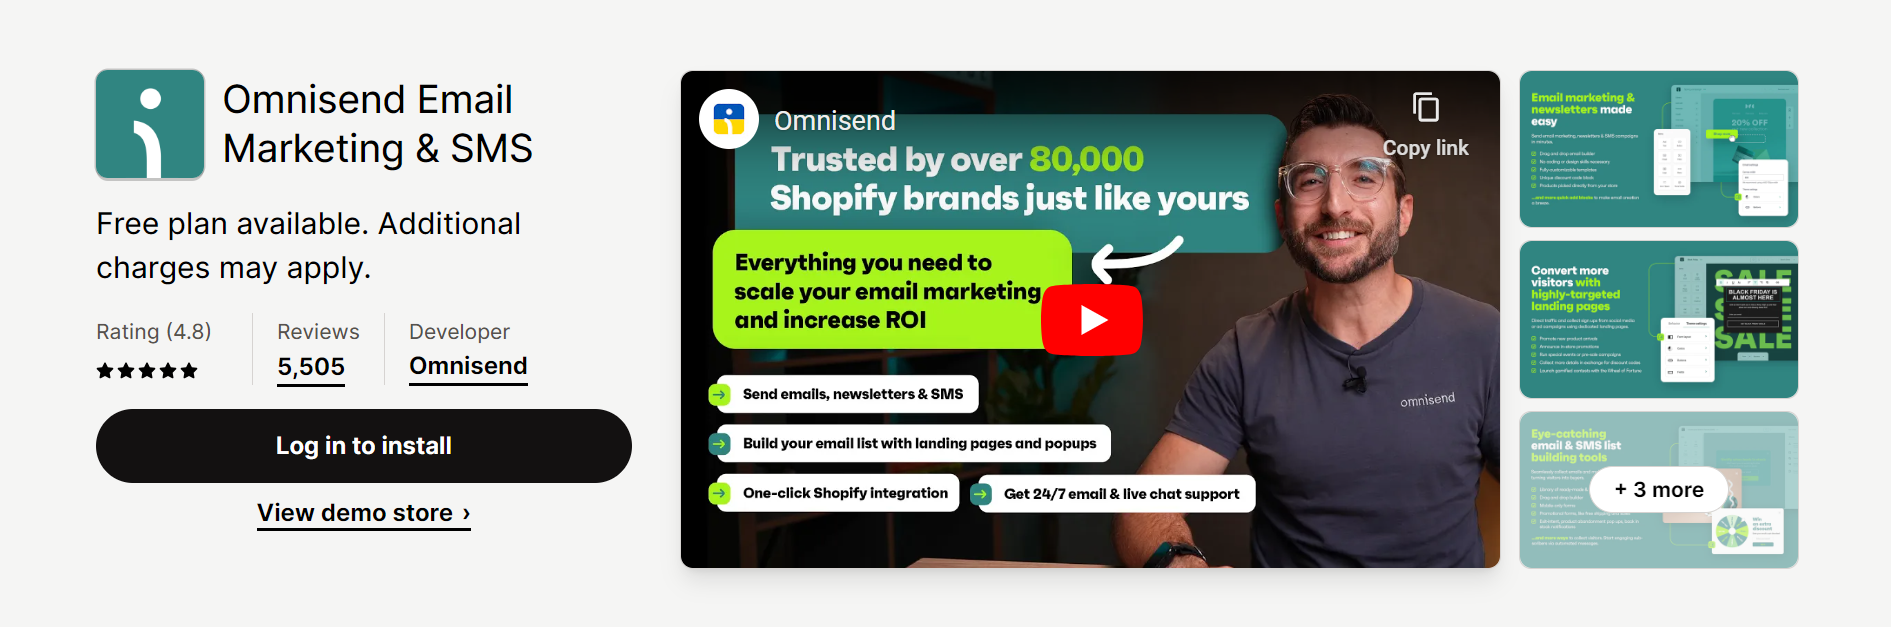 Omnisend Email Marketing & SMS